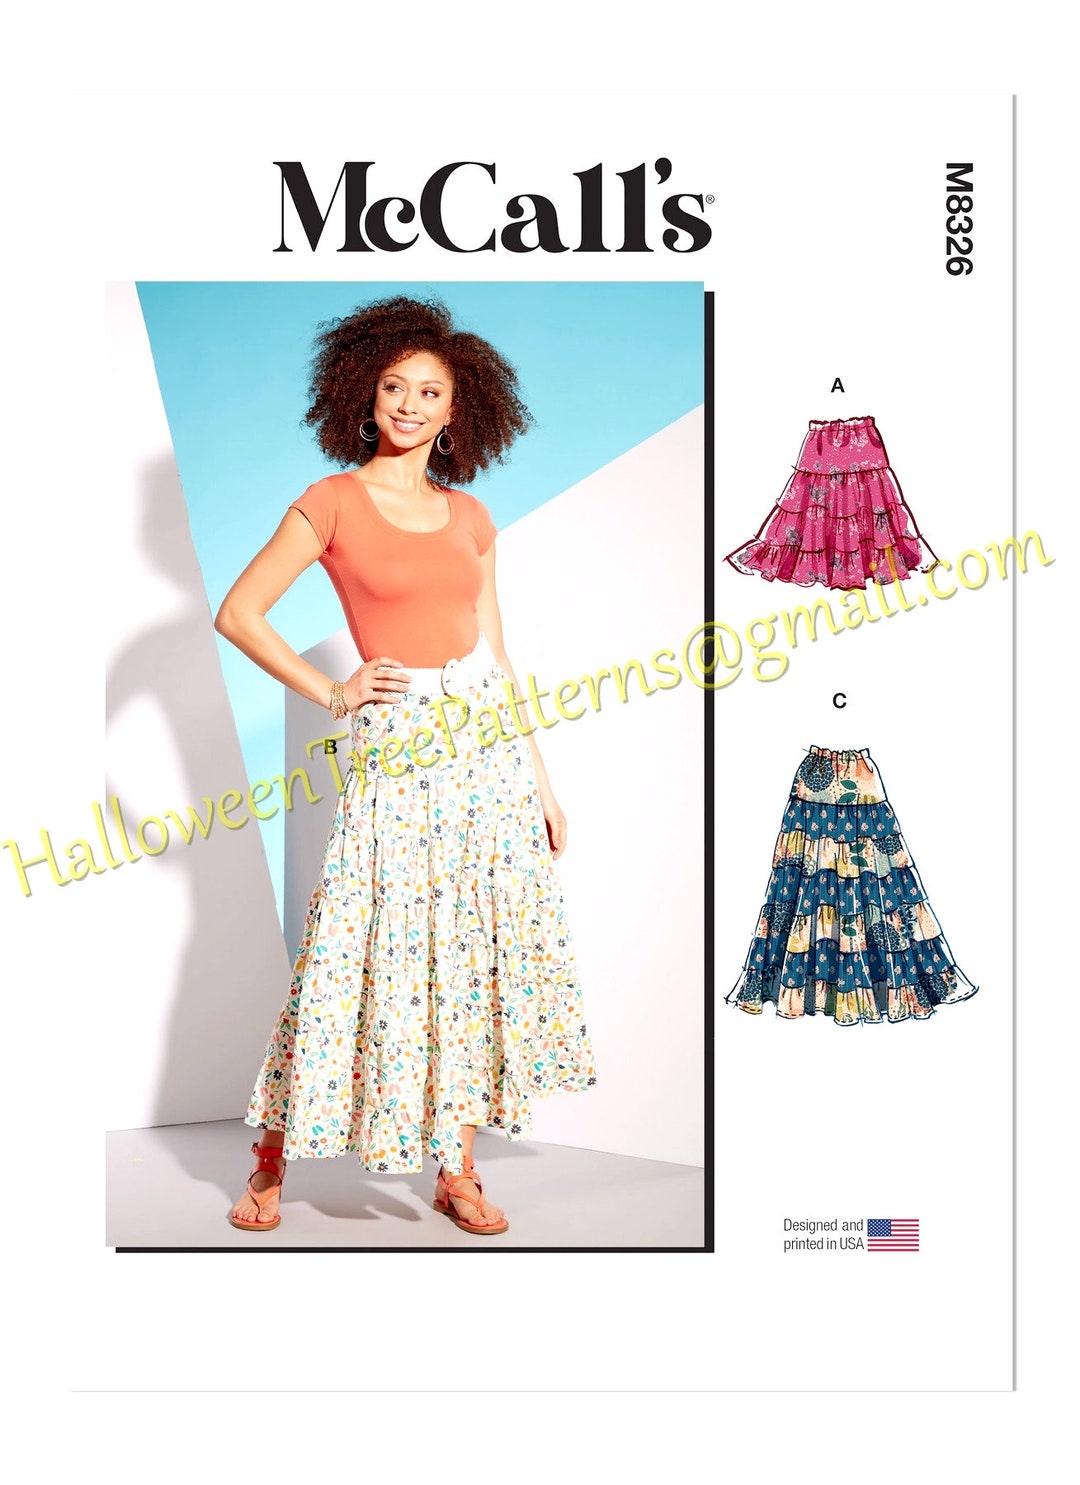 Mccalls 8326 Easy Tiered Boho Skirt Sewing Pattern Sizes XS-M - Etsy